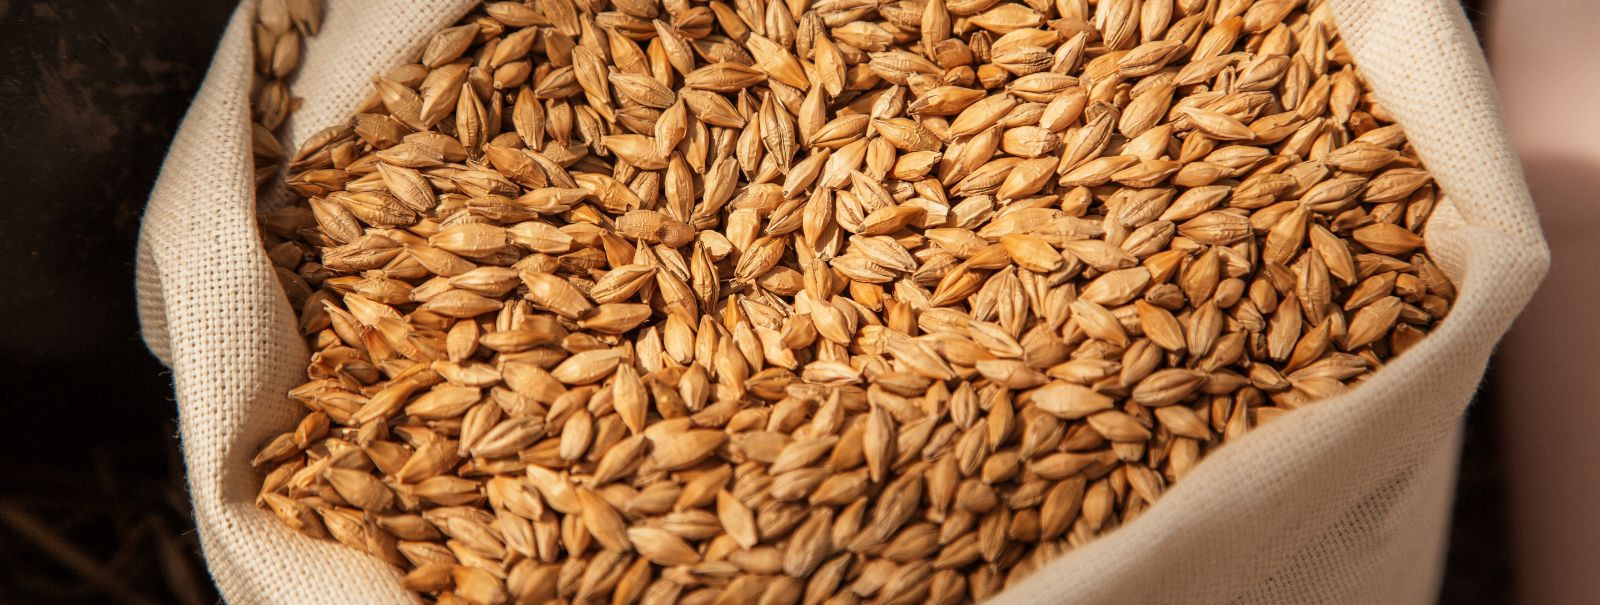 Malt is the backbone of beer, providing the essential sugars needed for fermentation. It's made by soaking cereal grains, typically barley, in water to initiate